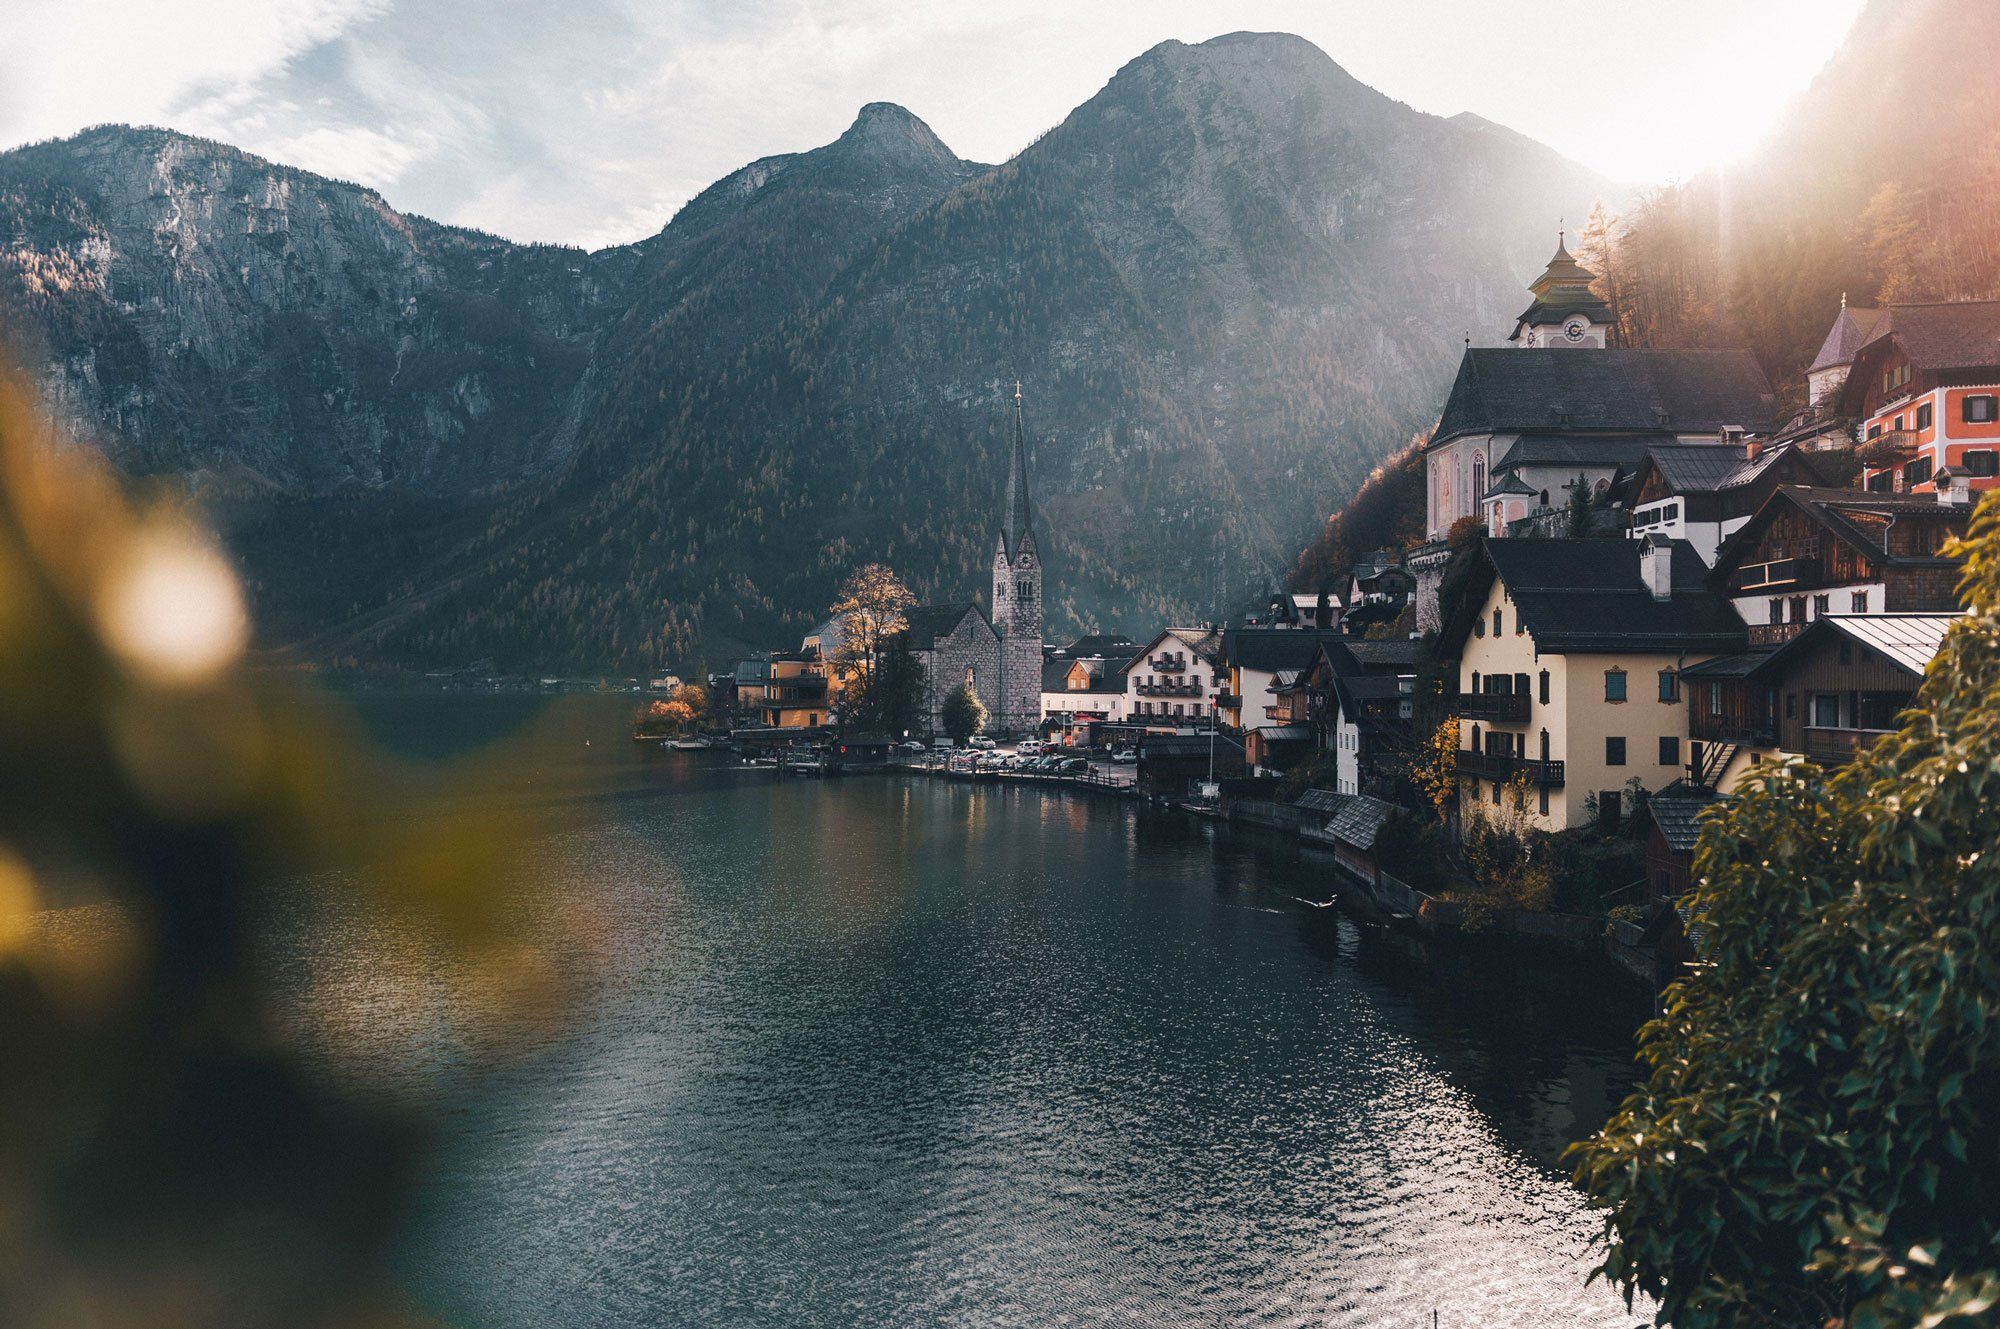 12 things you need to know before going to Austria